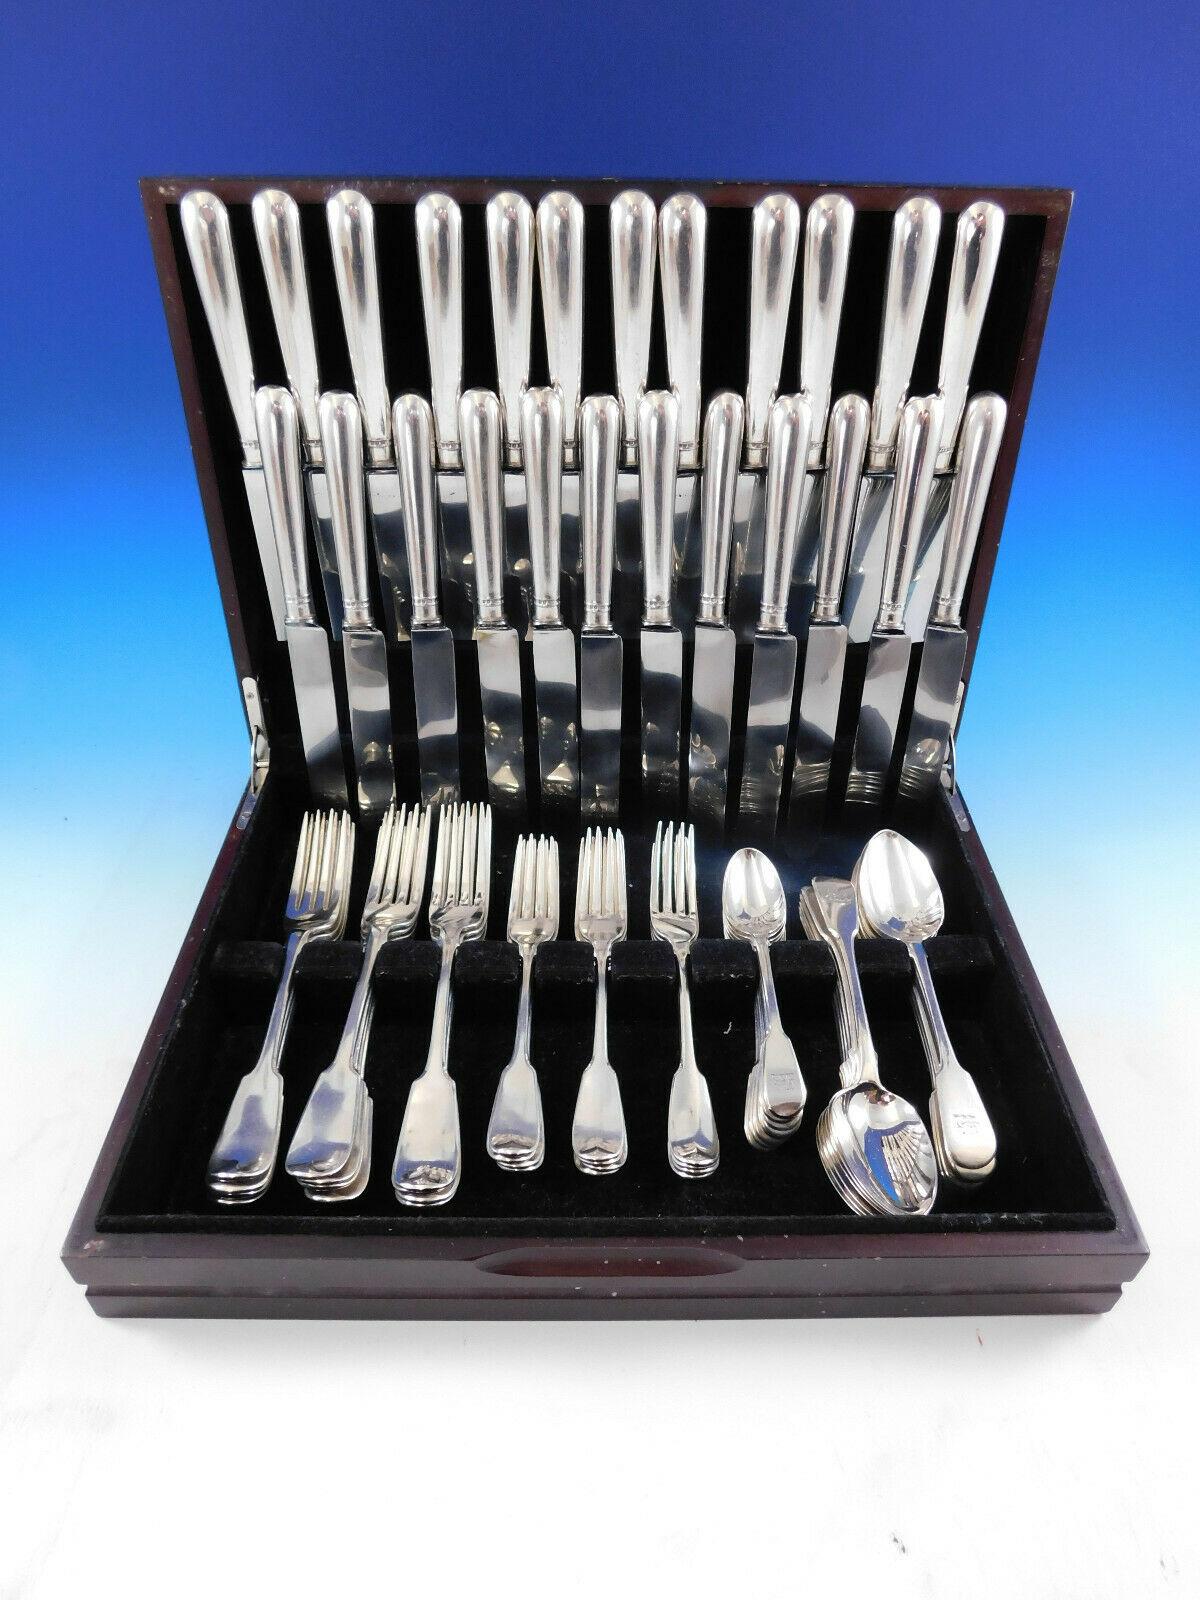 Classic Fiddle design English sterling silver Flatware set, 68 pieces. This set includes:

12 Large dinner size knives, 10 1/2